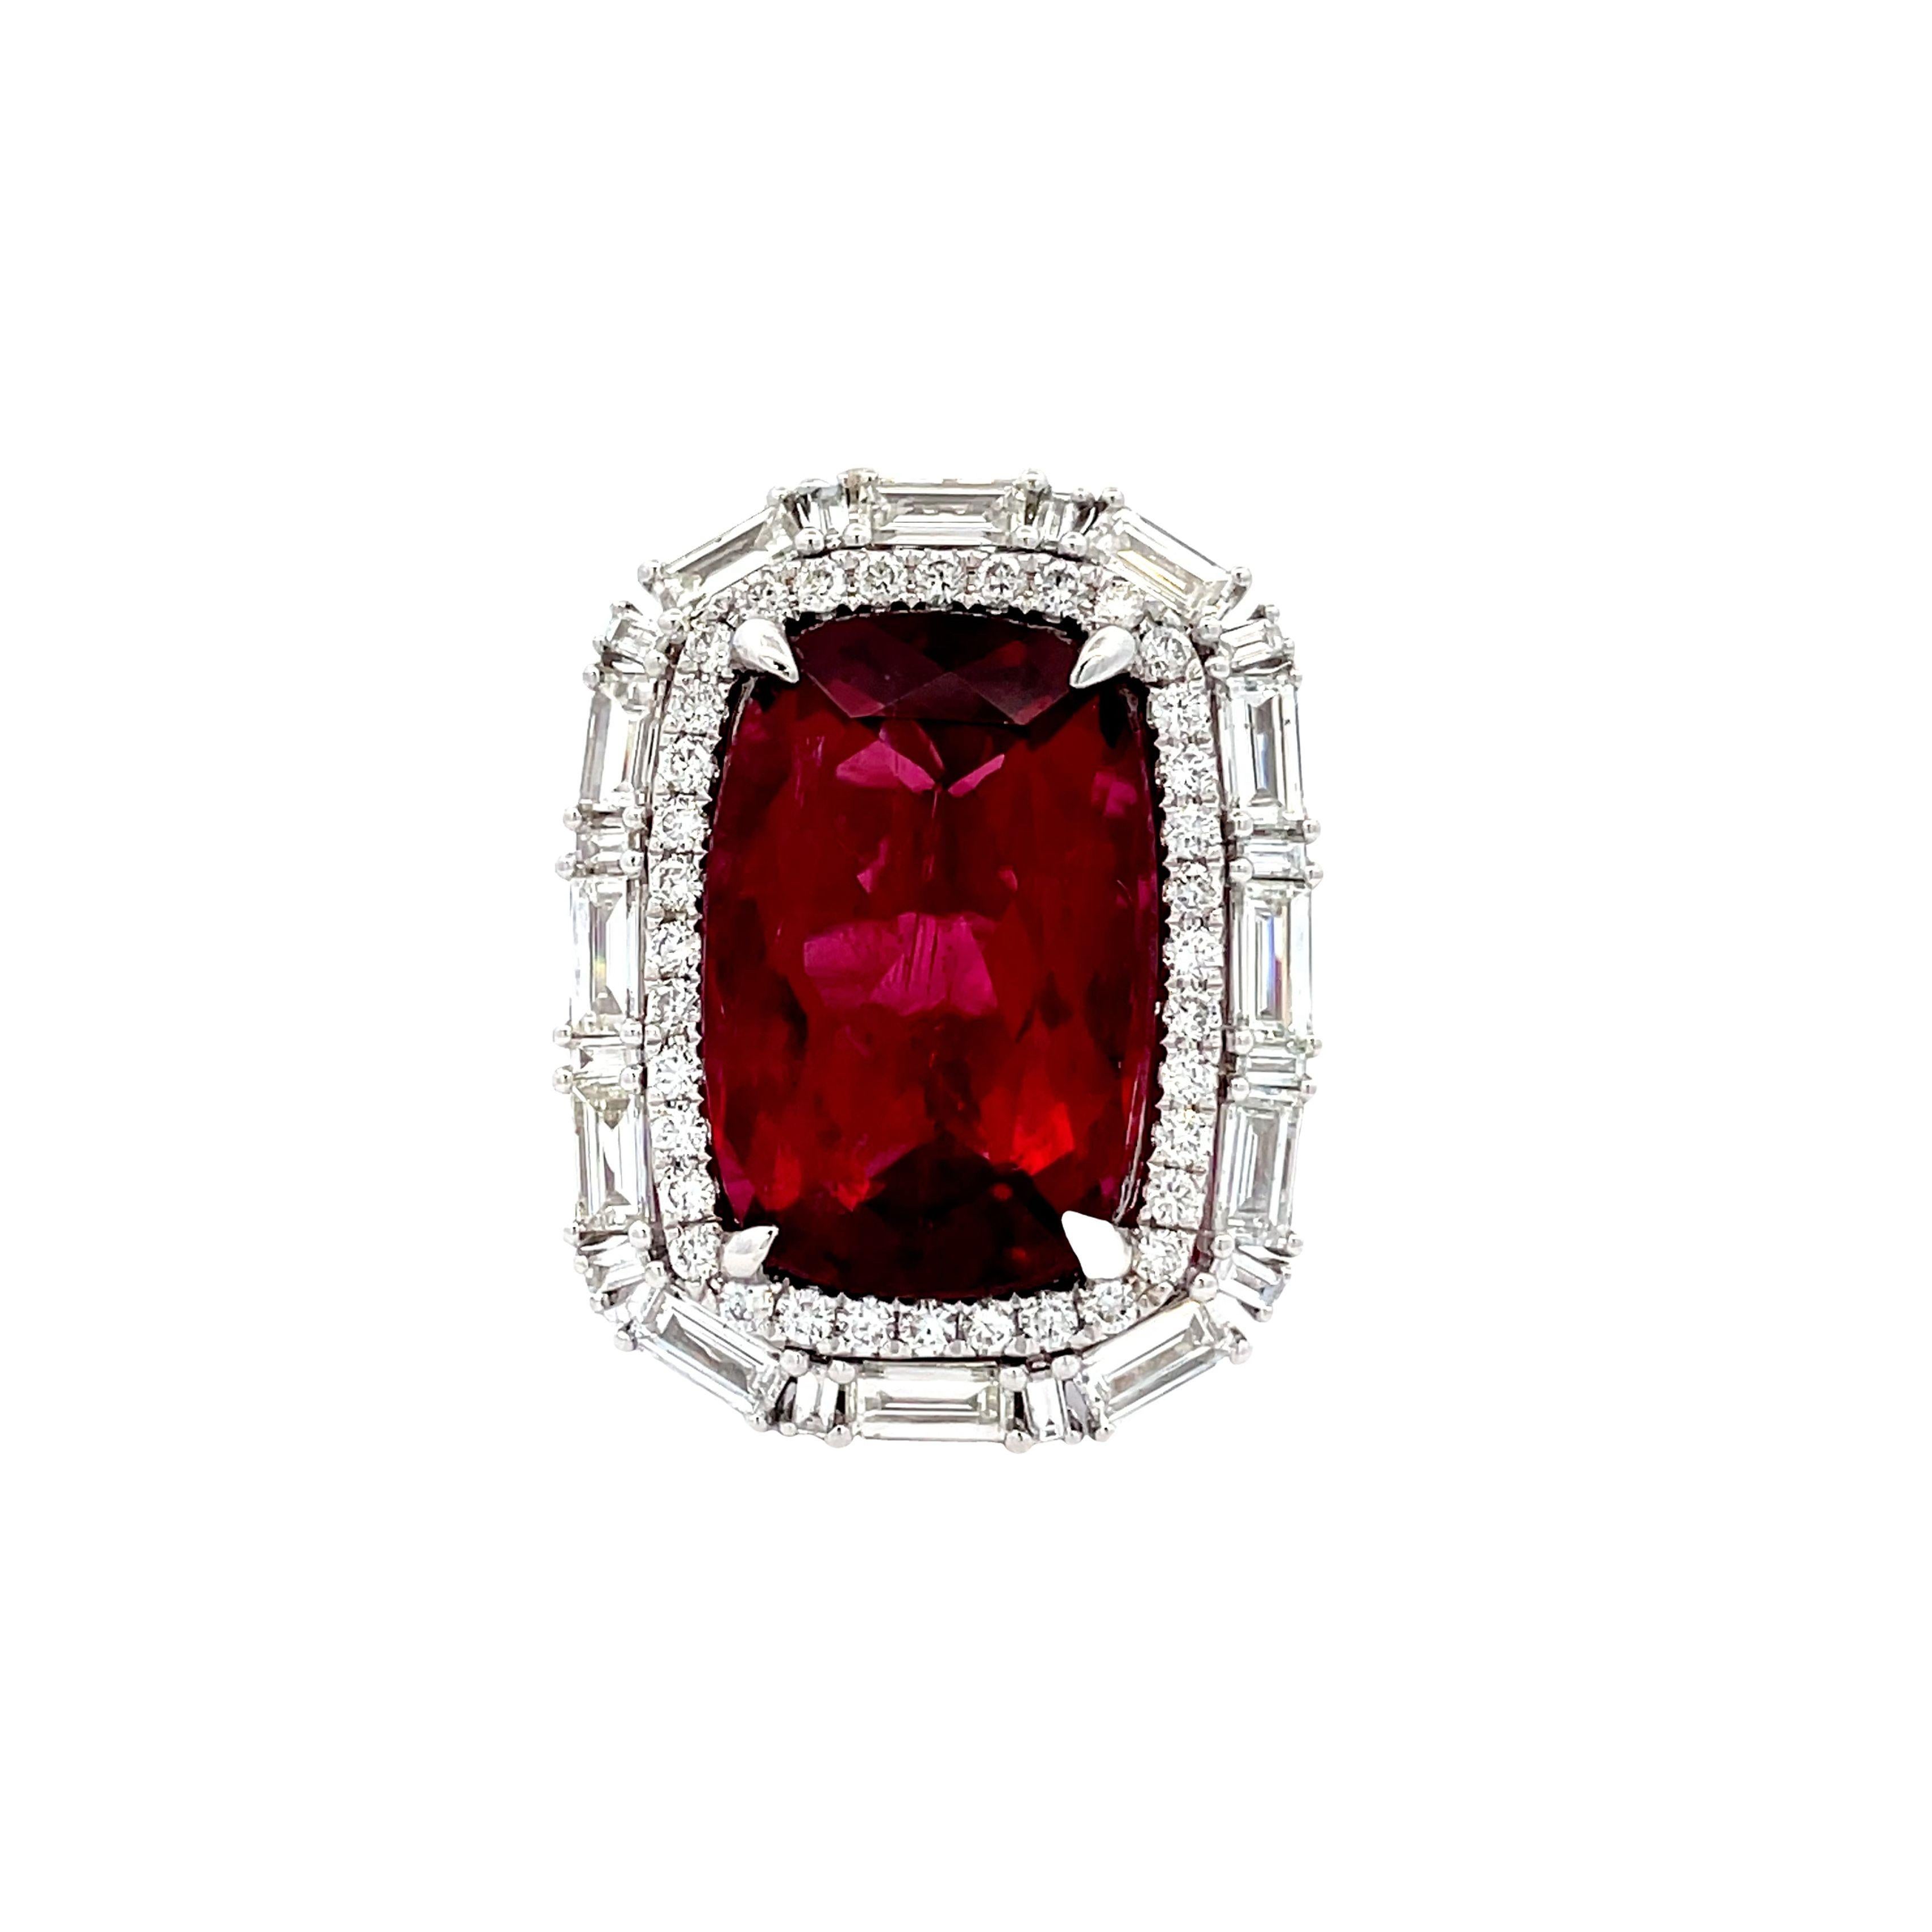 Indulge in luxury with our size 7 18KW Ring, showcasing a stunning 11.01 CT cushion-cut red tourmaline, perfectly complemented by 1.75 CT of mixed-shape white diamonds, creating an exquisite statement piece of timeless elegance.